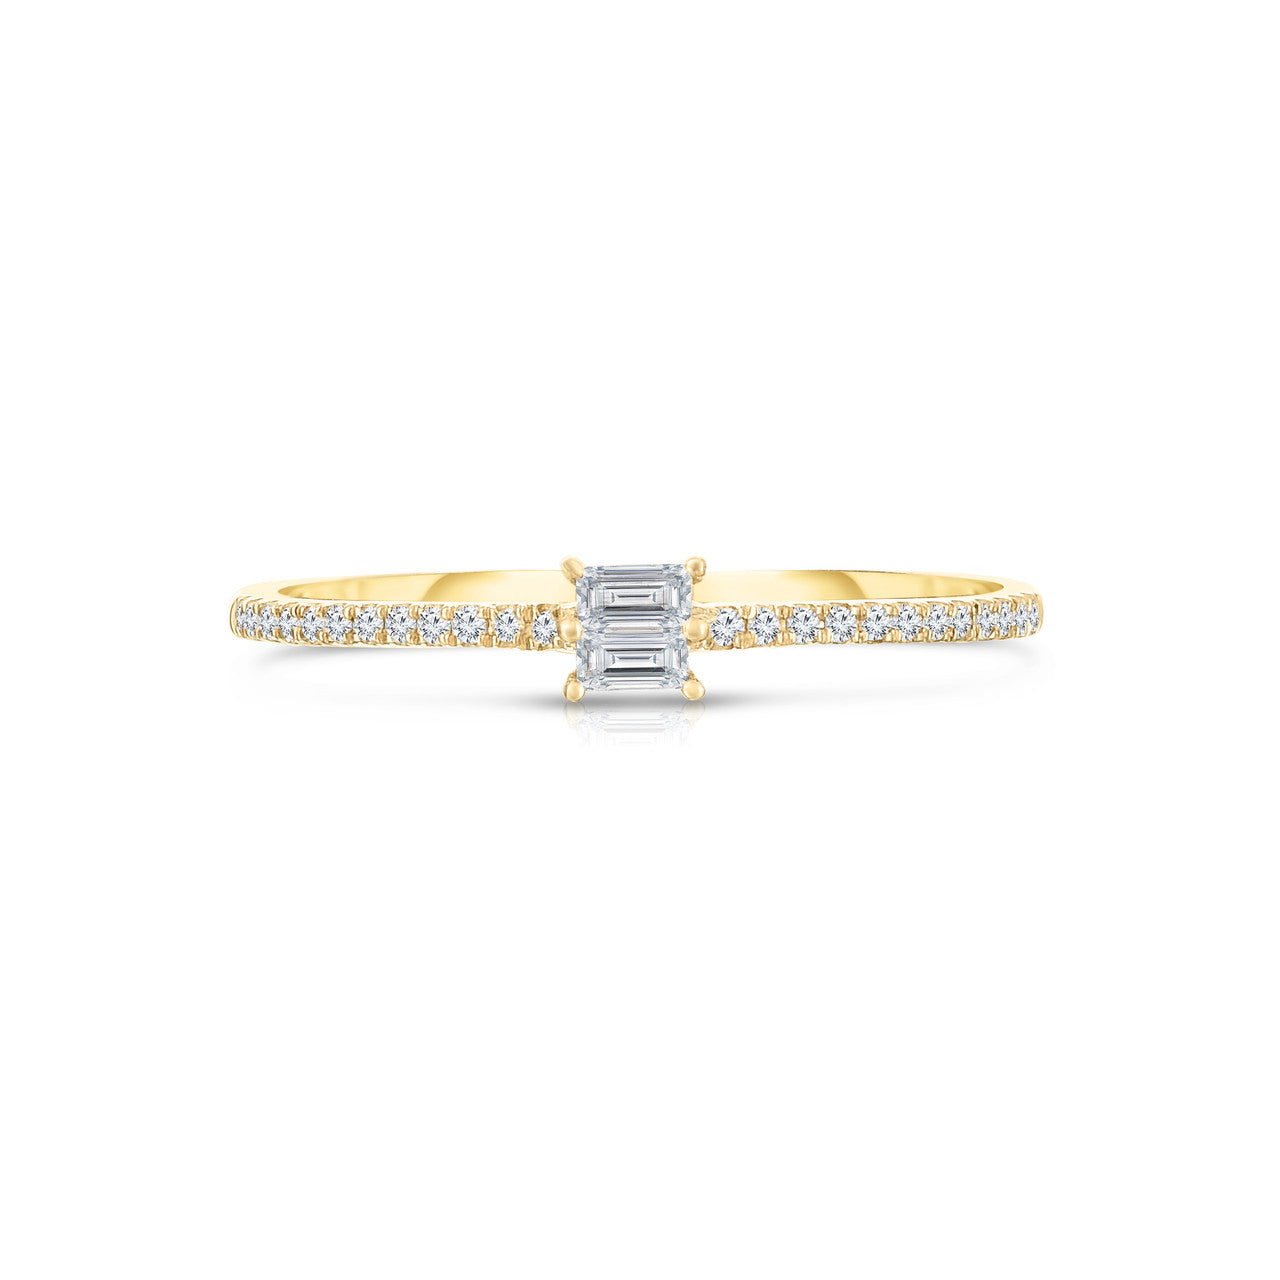 Stacked Baguette Diamond Ring in Yellow Gold